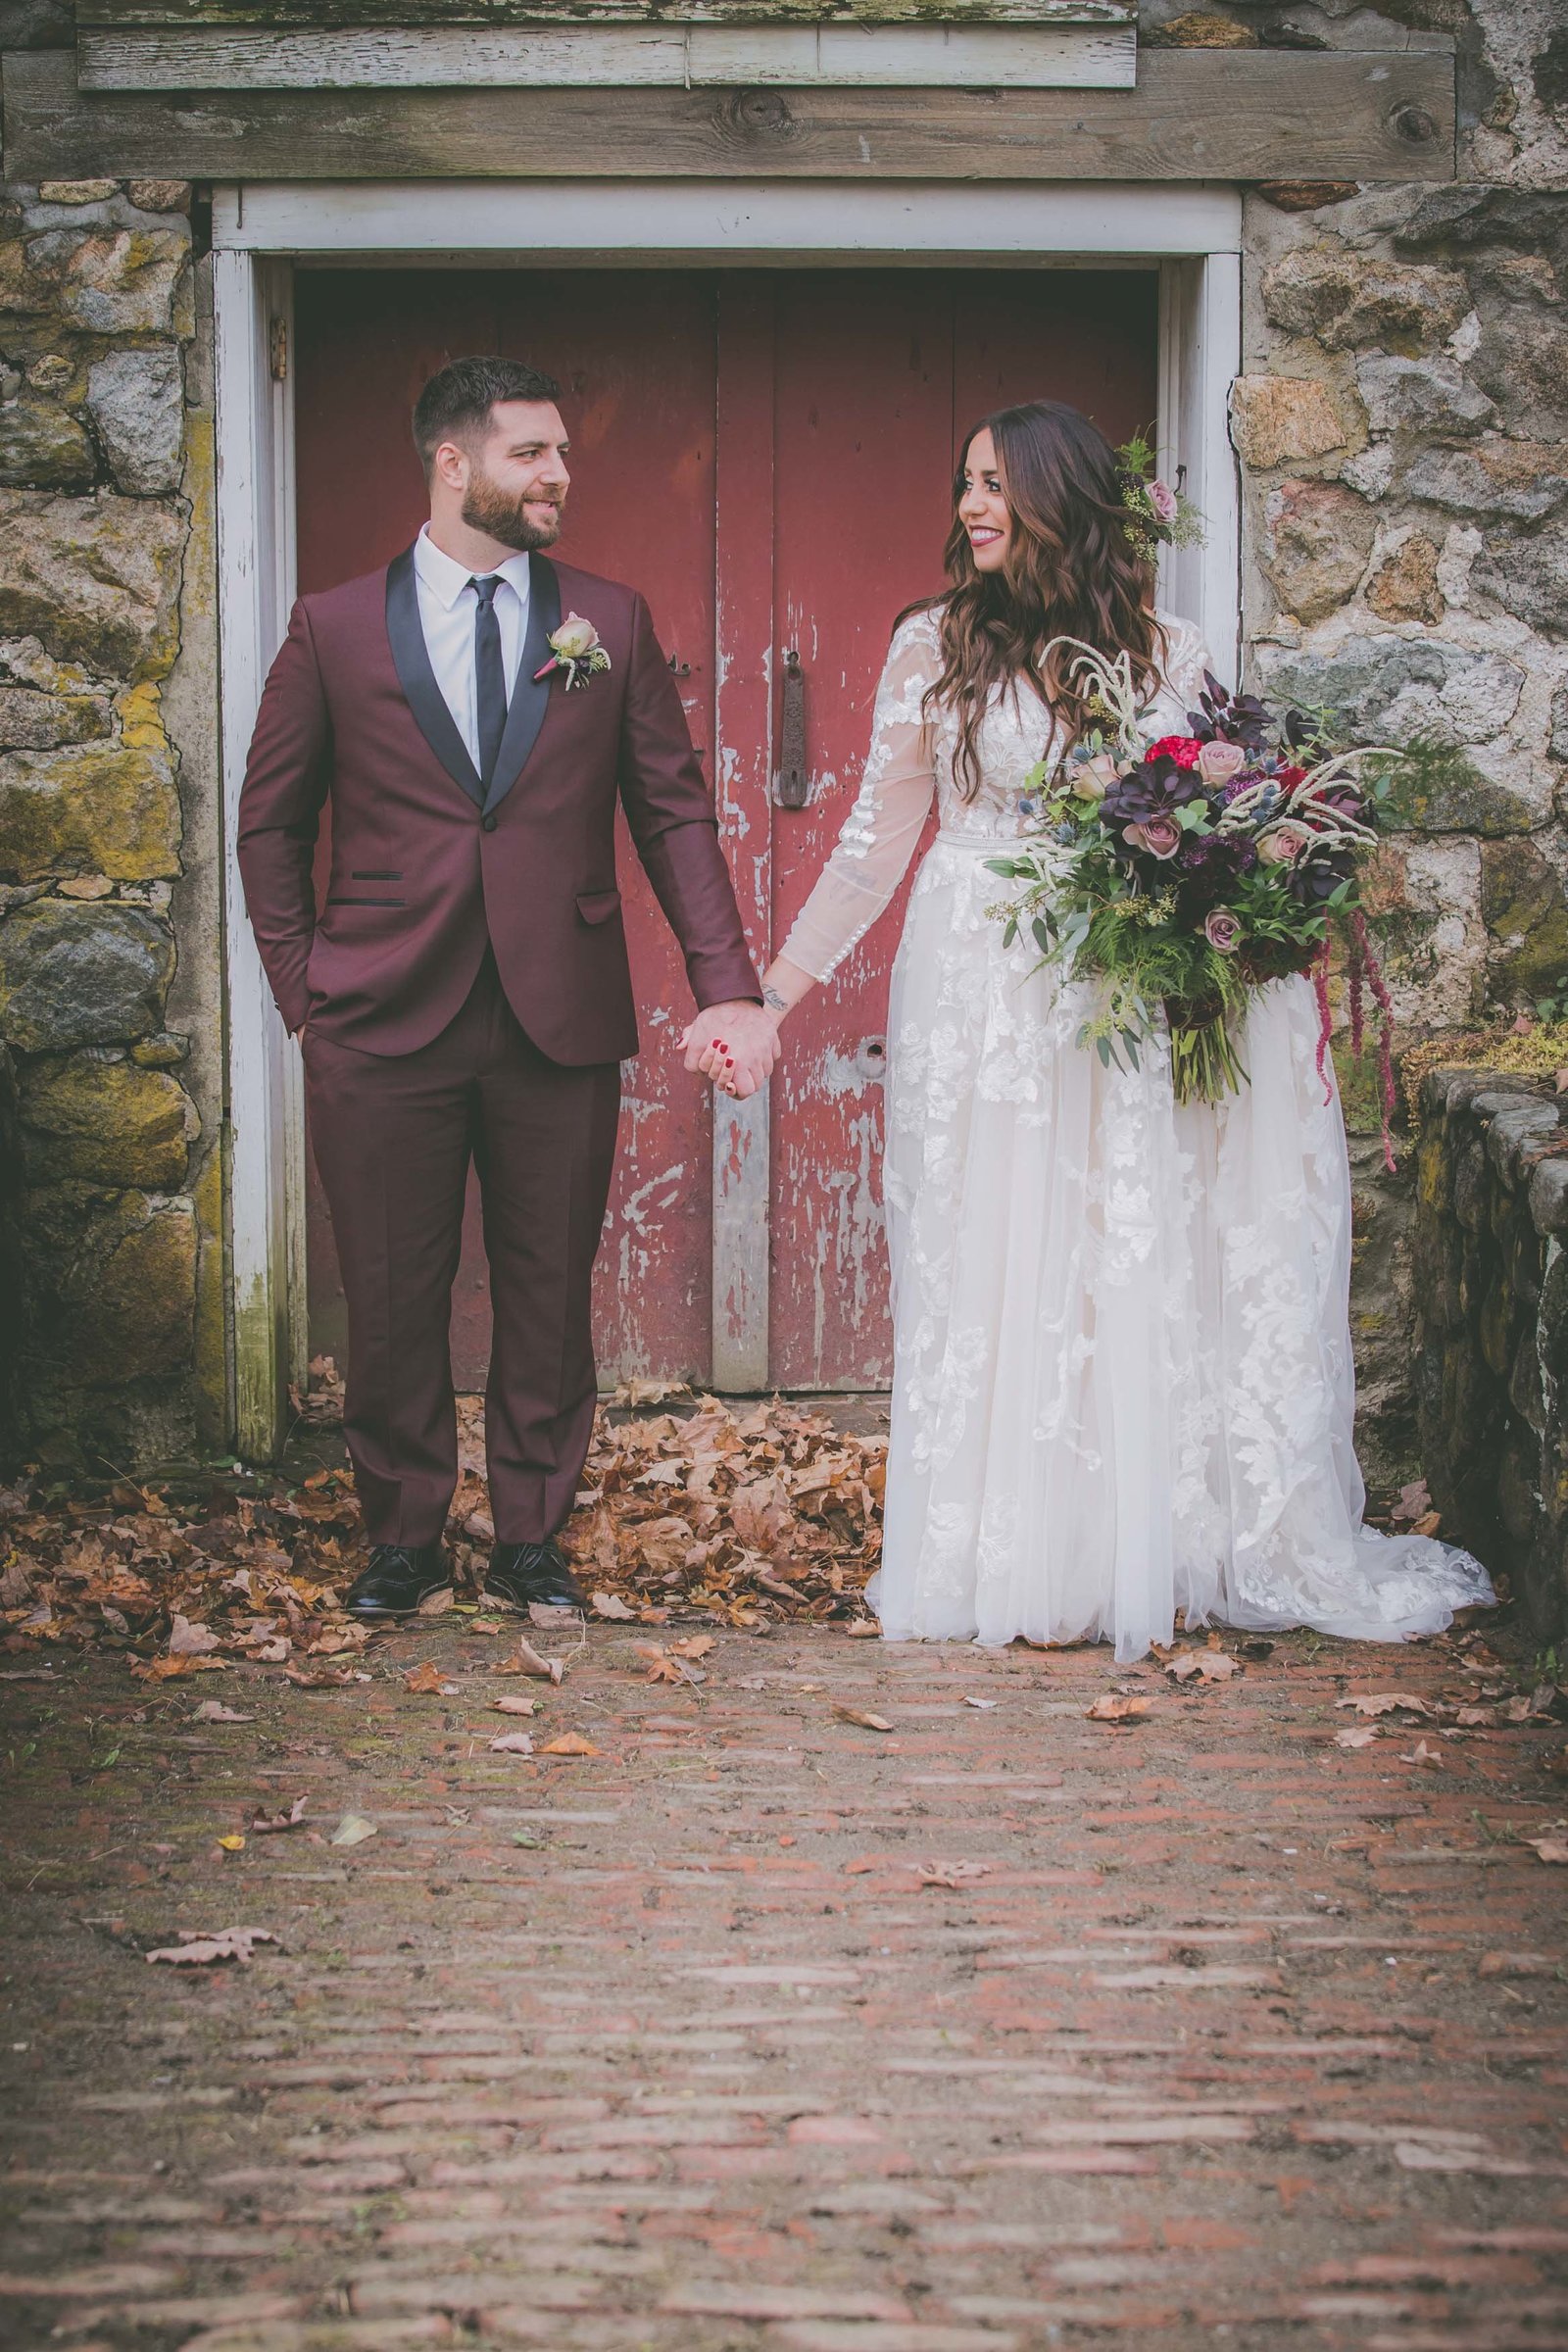 Groom and bride hold hands against a red door.